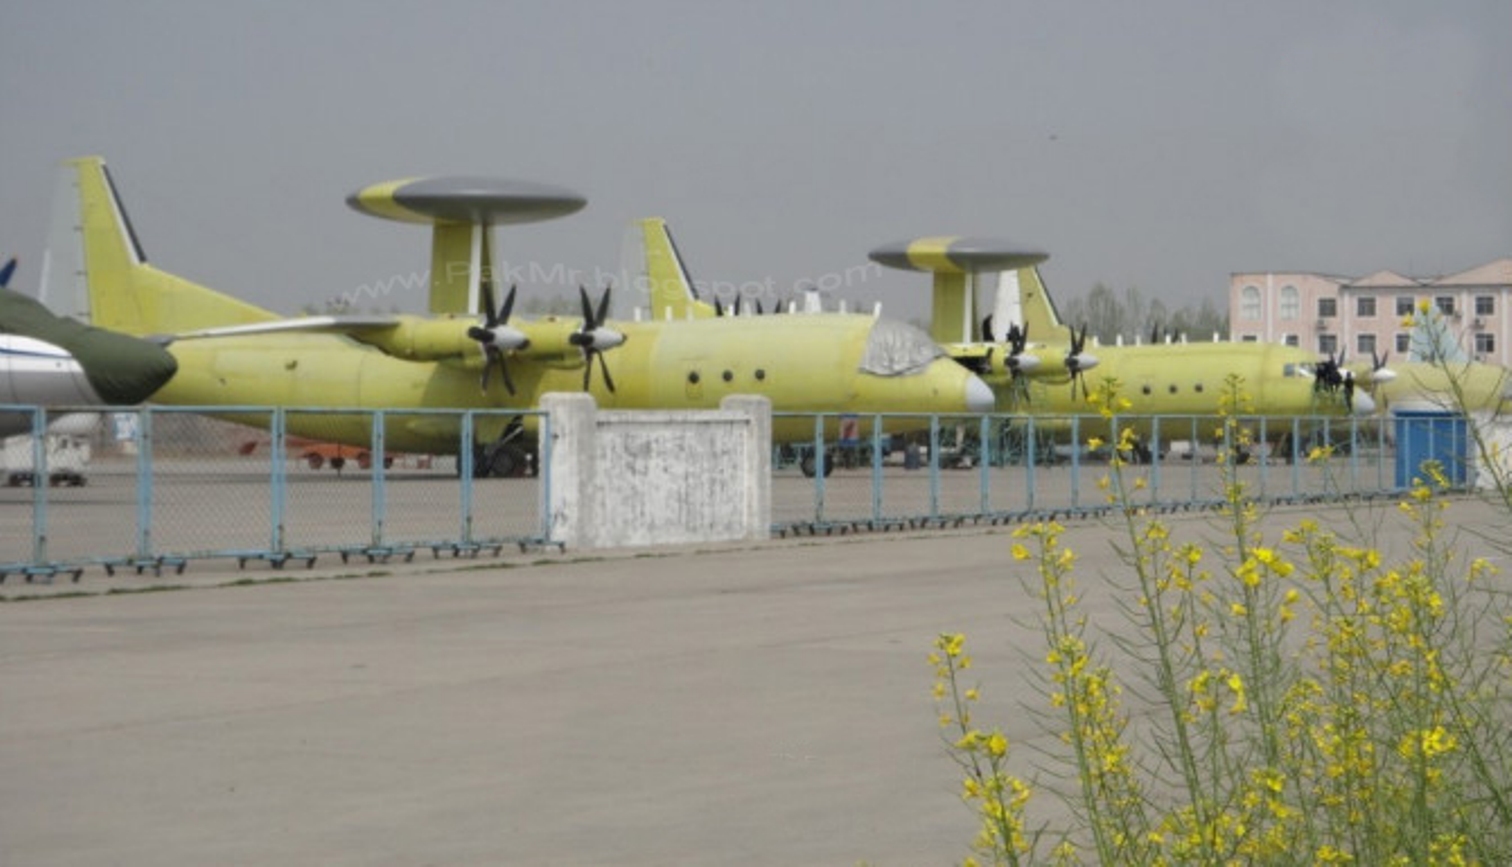 operational paf Chinese ZDK-03 Airborne Early Warning and Control System (AEW&C) Karakoram Eagle active electronically scanned array radar aesa Pakistan Air Force new flying air in service (3)